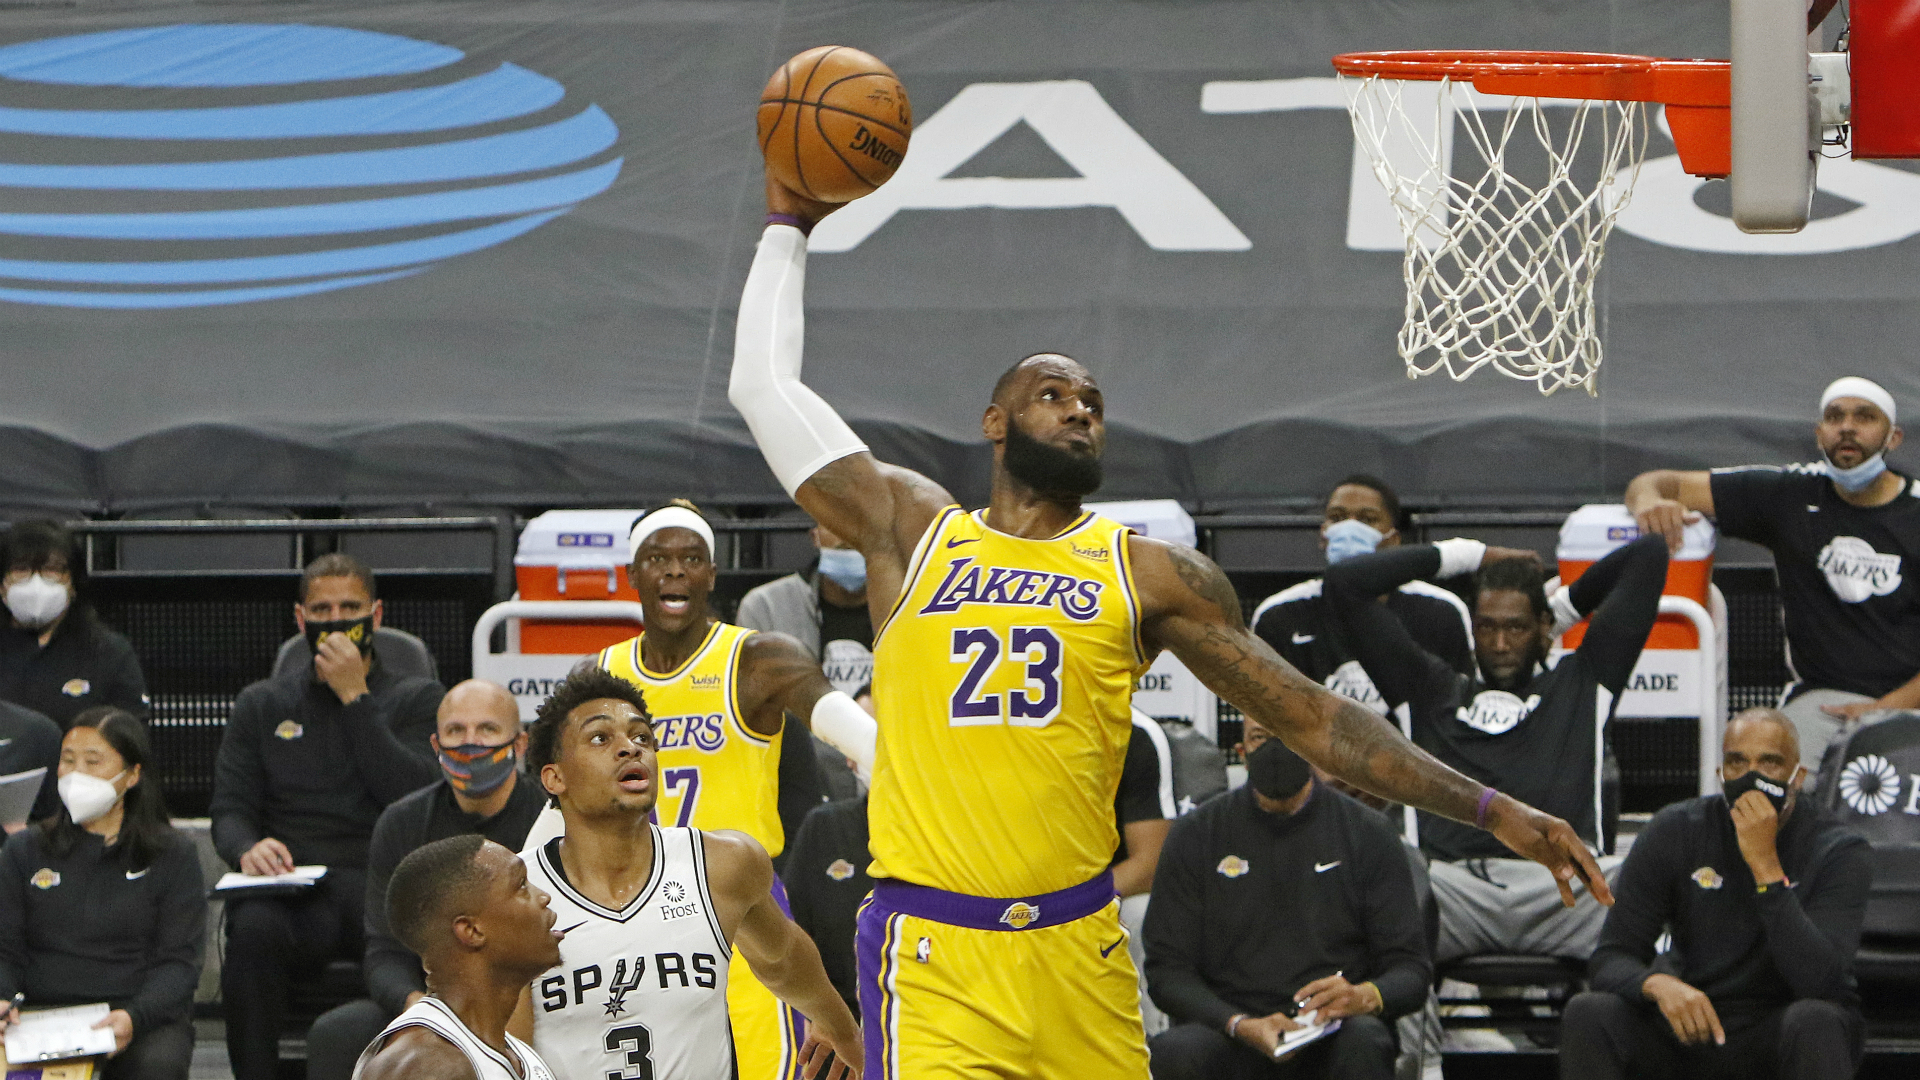 NBA rookie dunks on LeBron James and Kyrie Irving in the same damn